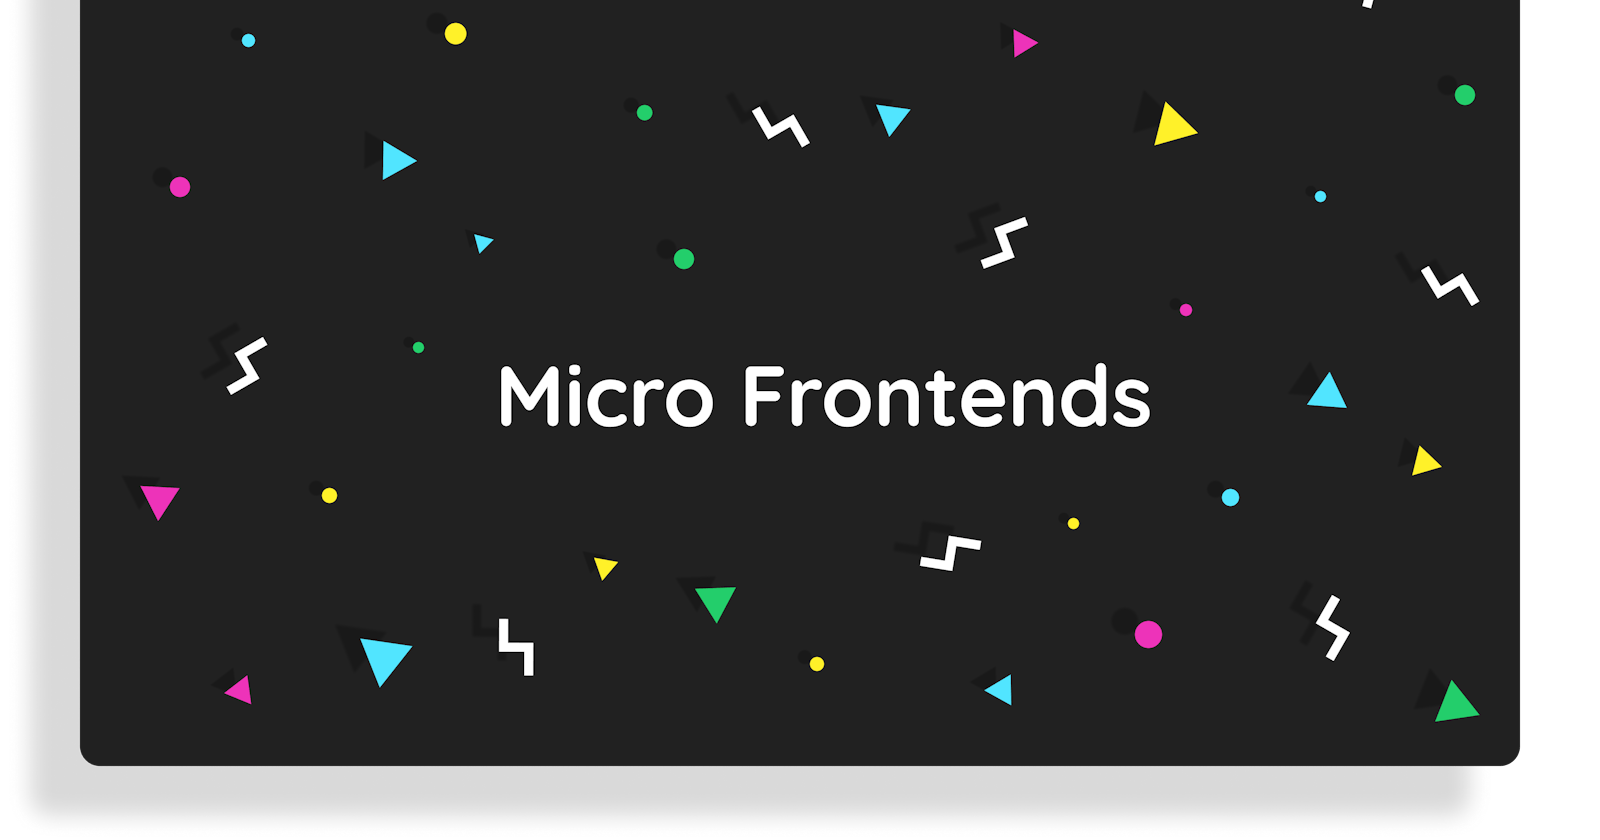 Micro Frontends in a Nutshell